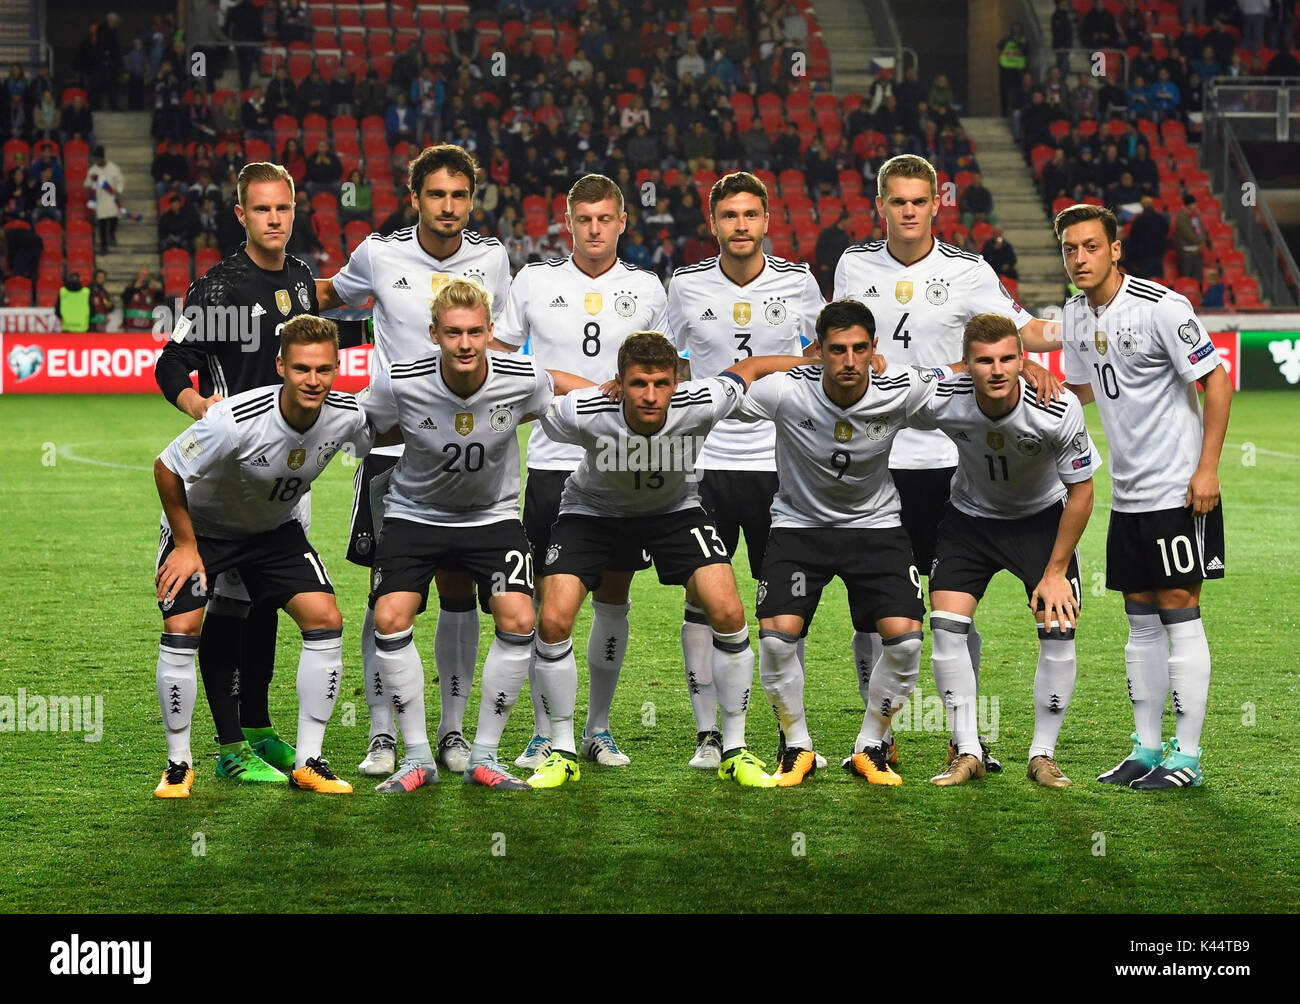 Prague, Czech Republic. 01st Sep, 2017. Germany national team pose before the Football world qualifier, Group C, match Czech Republic vs Germany, in Prague, Czech Republic, on Friday, September 1st, 2017. Upper row left to right: Marc-Andre ter Stegen, Mats Hummels, Toni Kroos, Jonas Hector, Matthias Ginter, front row left to right: Joshua Kimmich, Julian Brandt, Thomas Muller, Lars Stindl, Timo Werner and Mesut Ozil. Credit: Michal Krumphanzl/CTK Photo/Alamy Live News Stock Photo